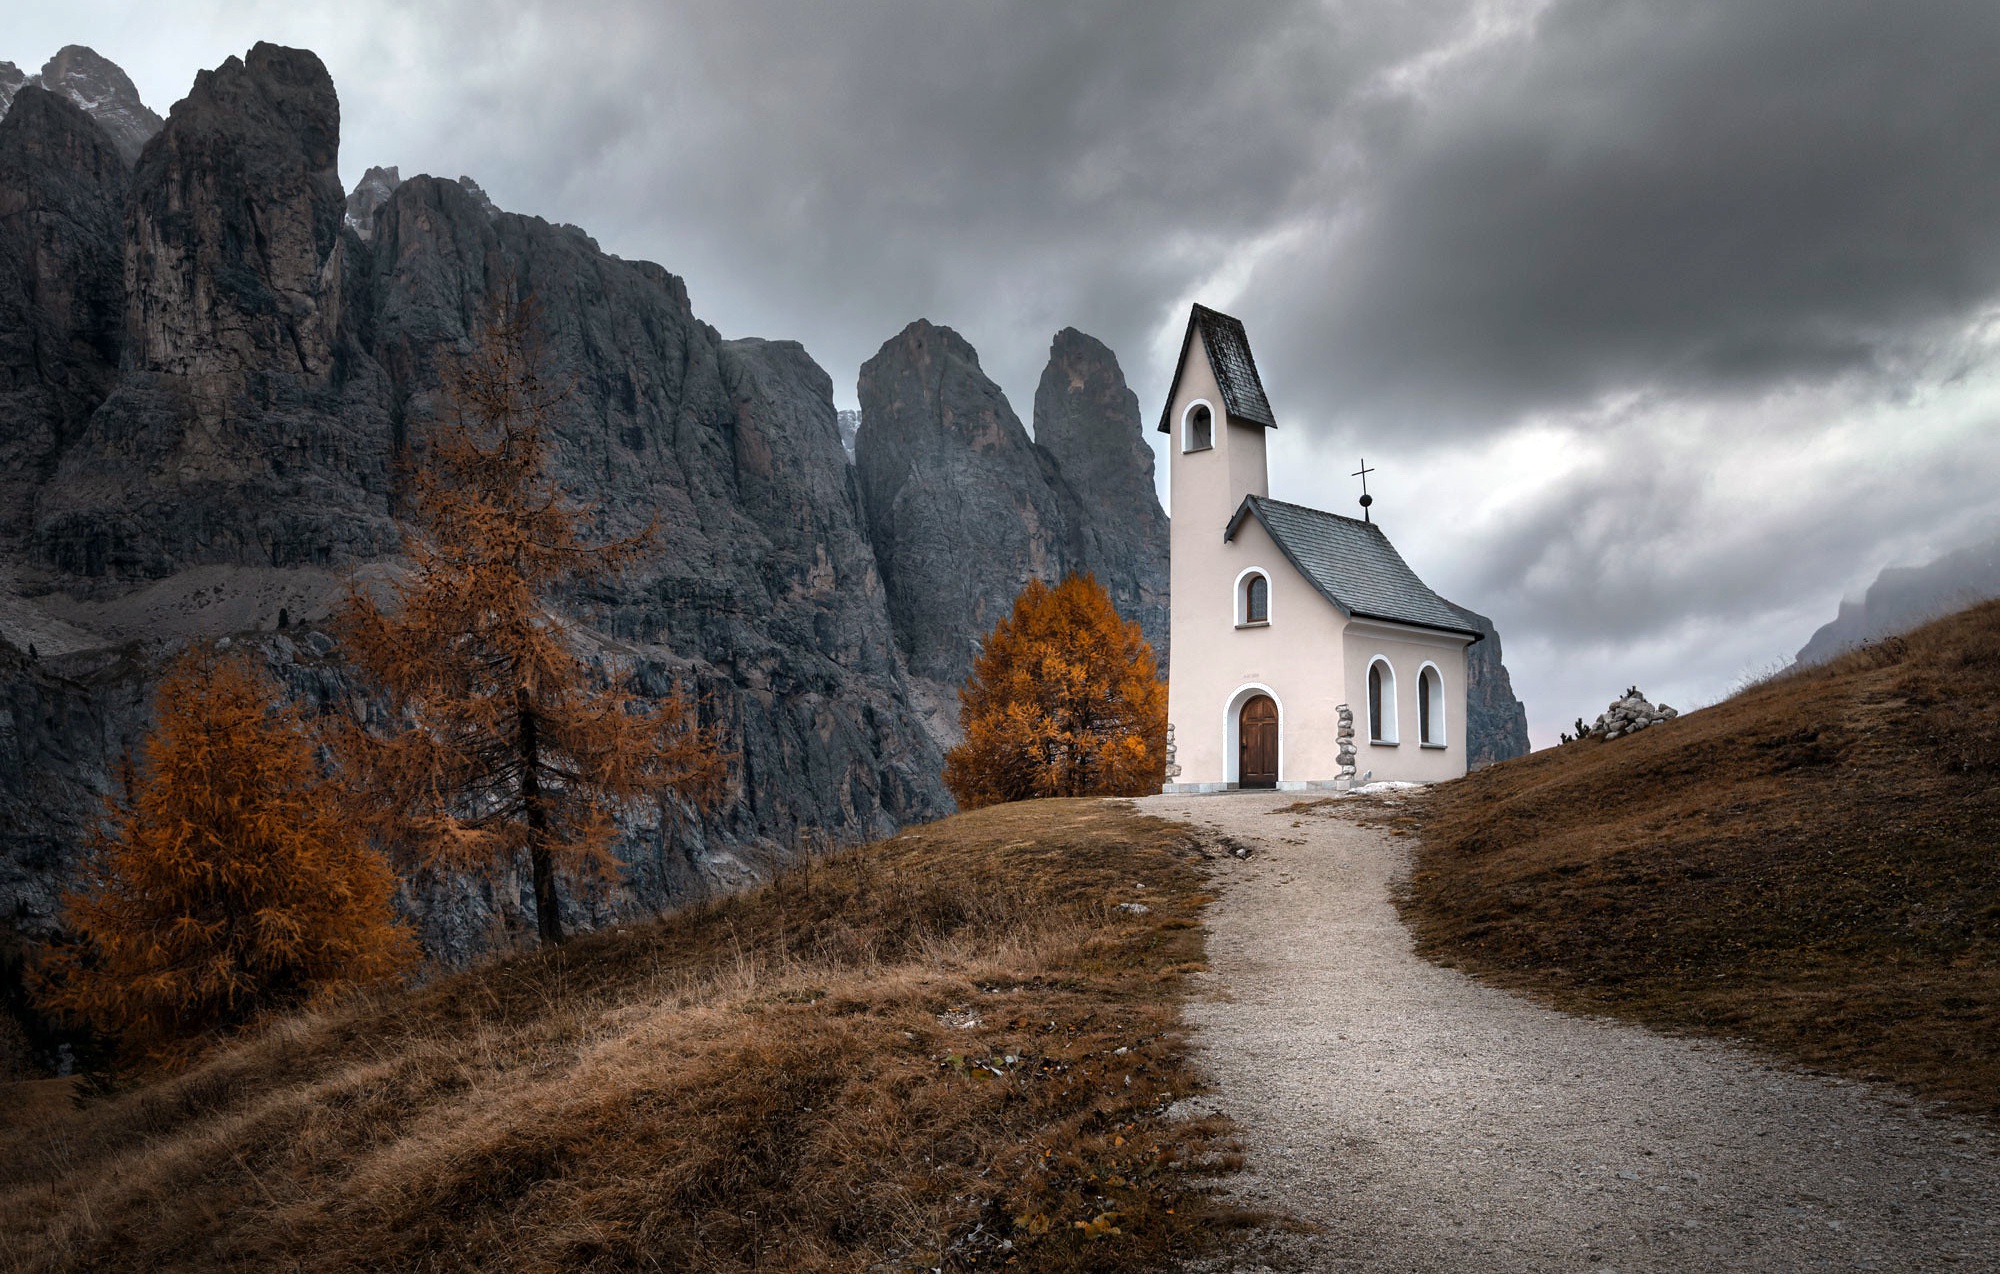 General 2000x1274 building Dolomites outdoors church fall